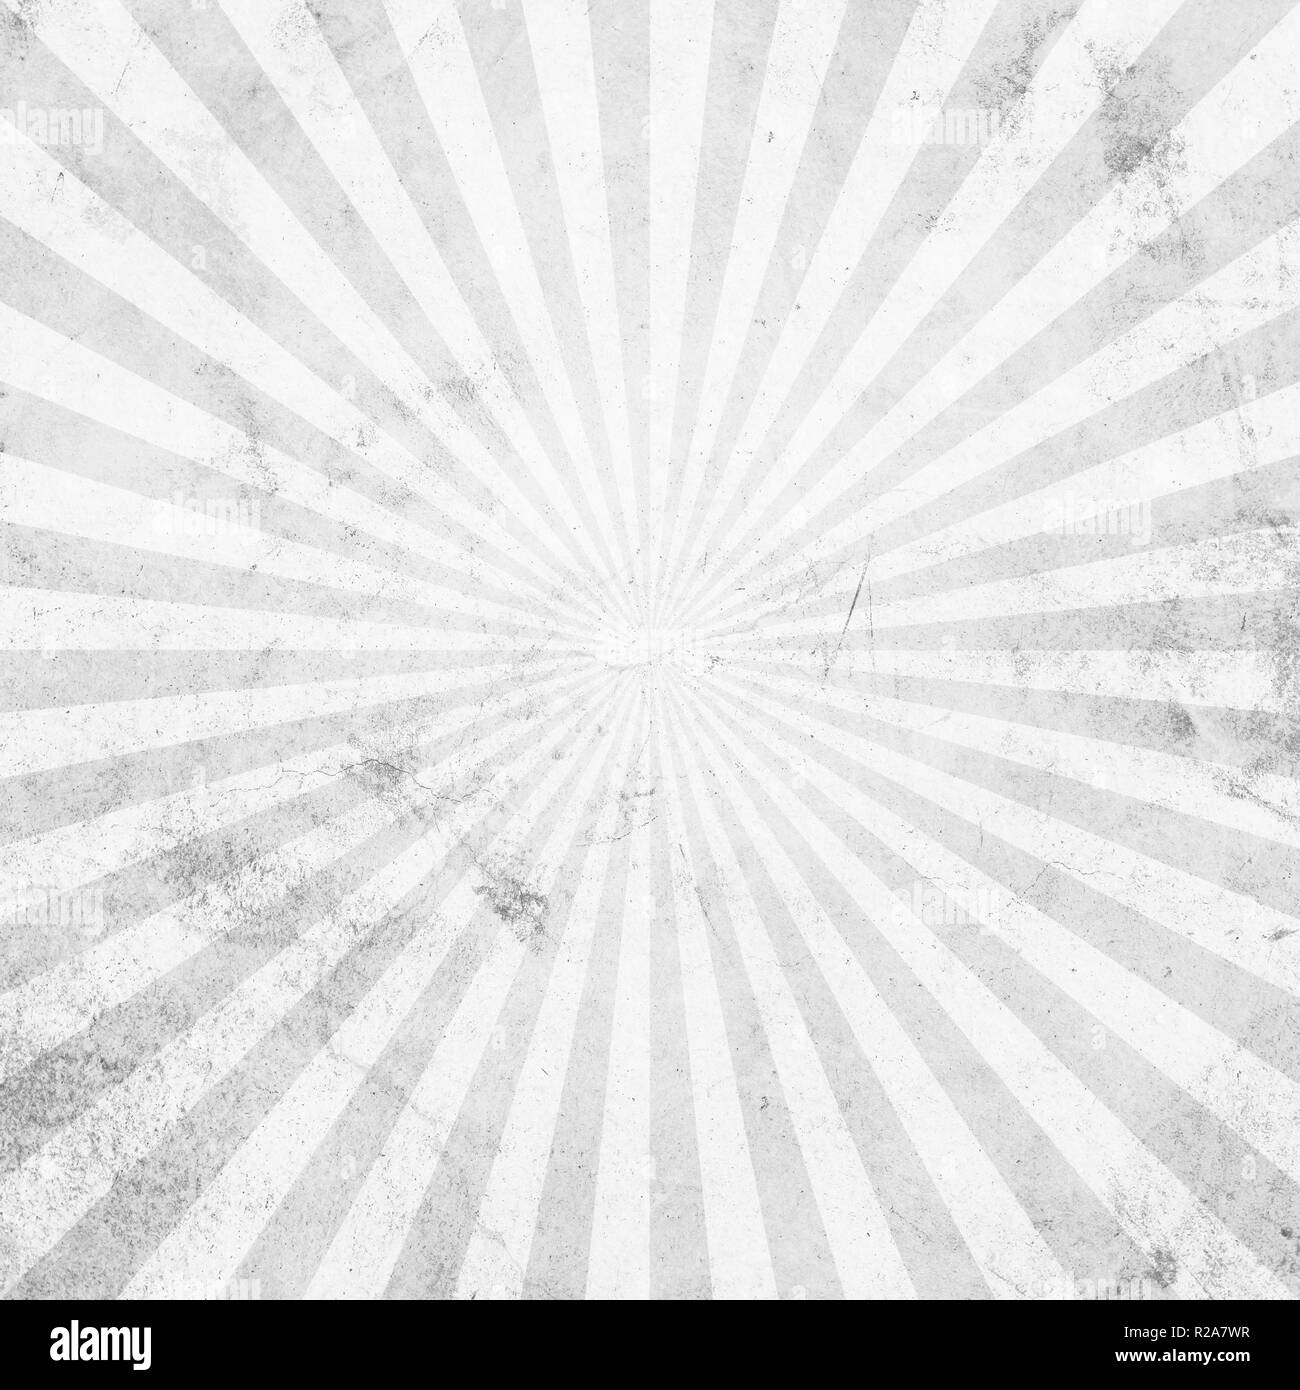 White and gray sunburst vintage and pattern background with space. Stock Photo